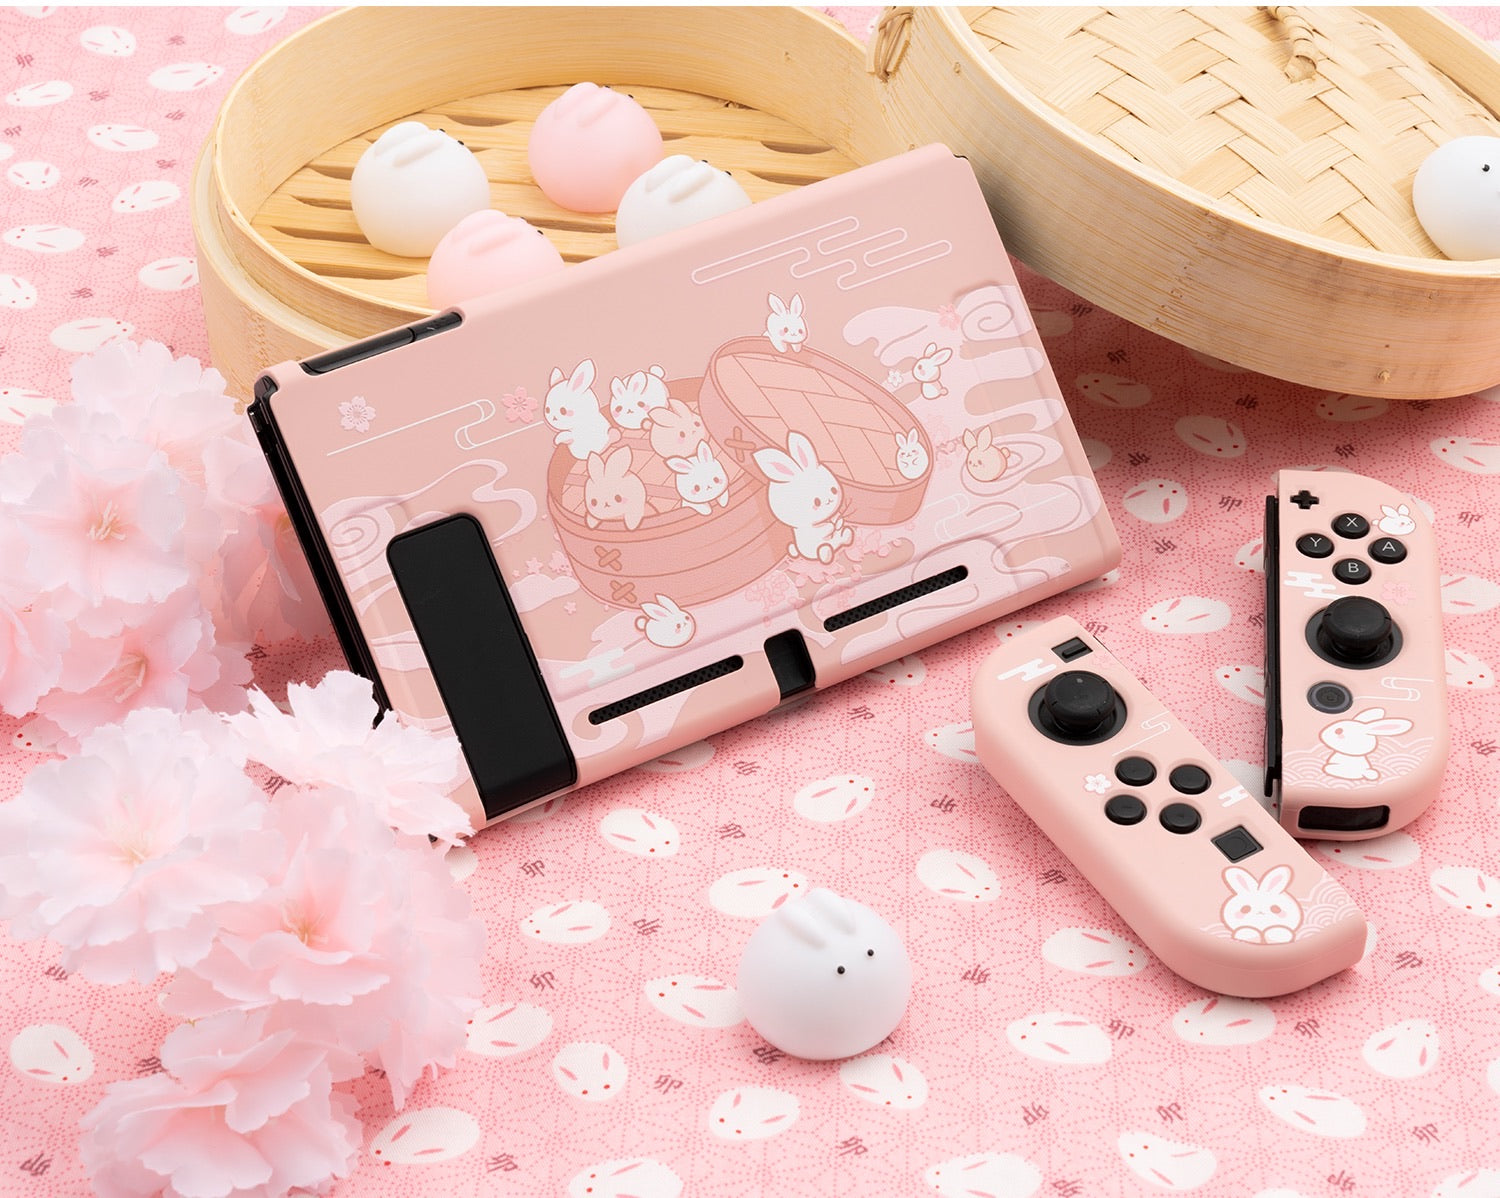 Sakura Bunny Pink Pastel colors__Nintendo Switch Protection Casing Cover